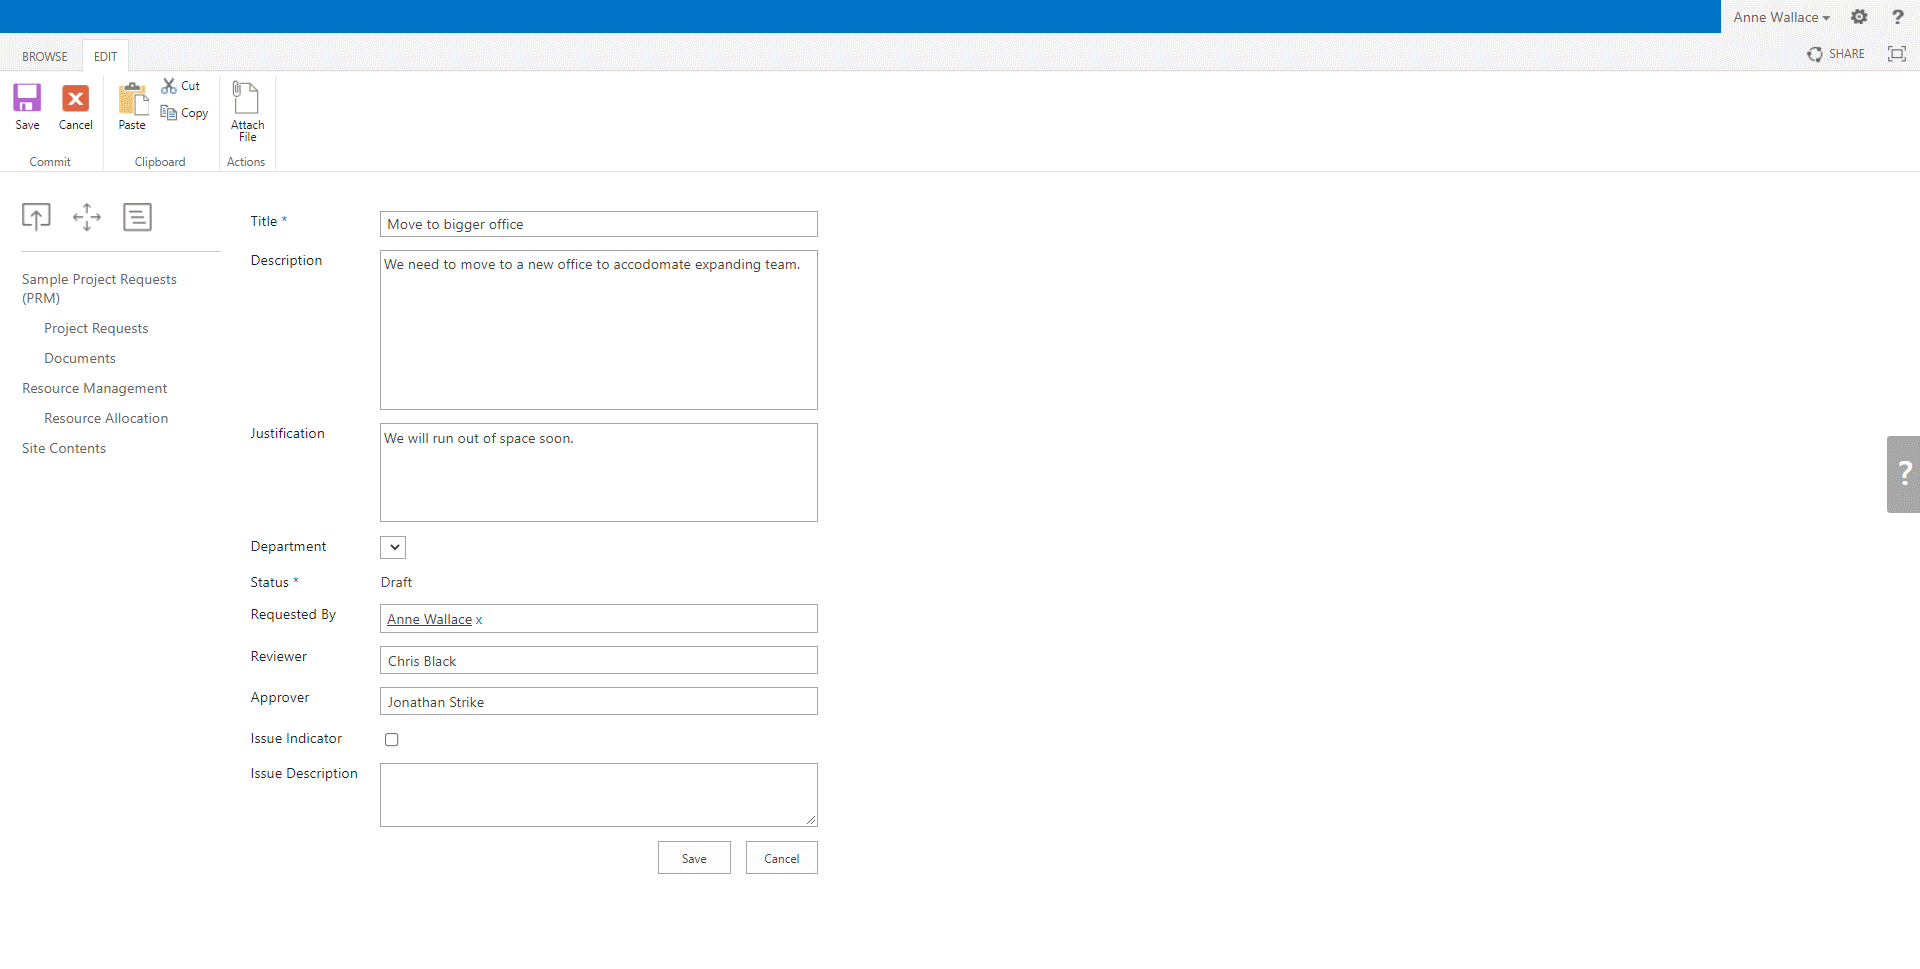 Log project request - Draft SharePoint